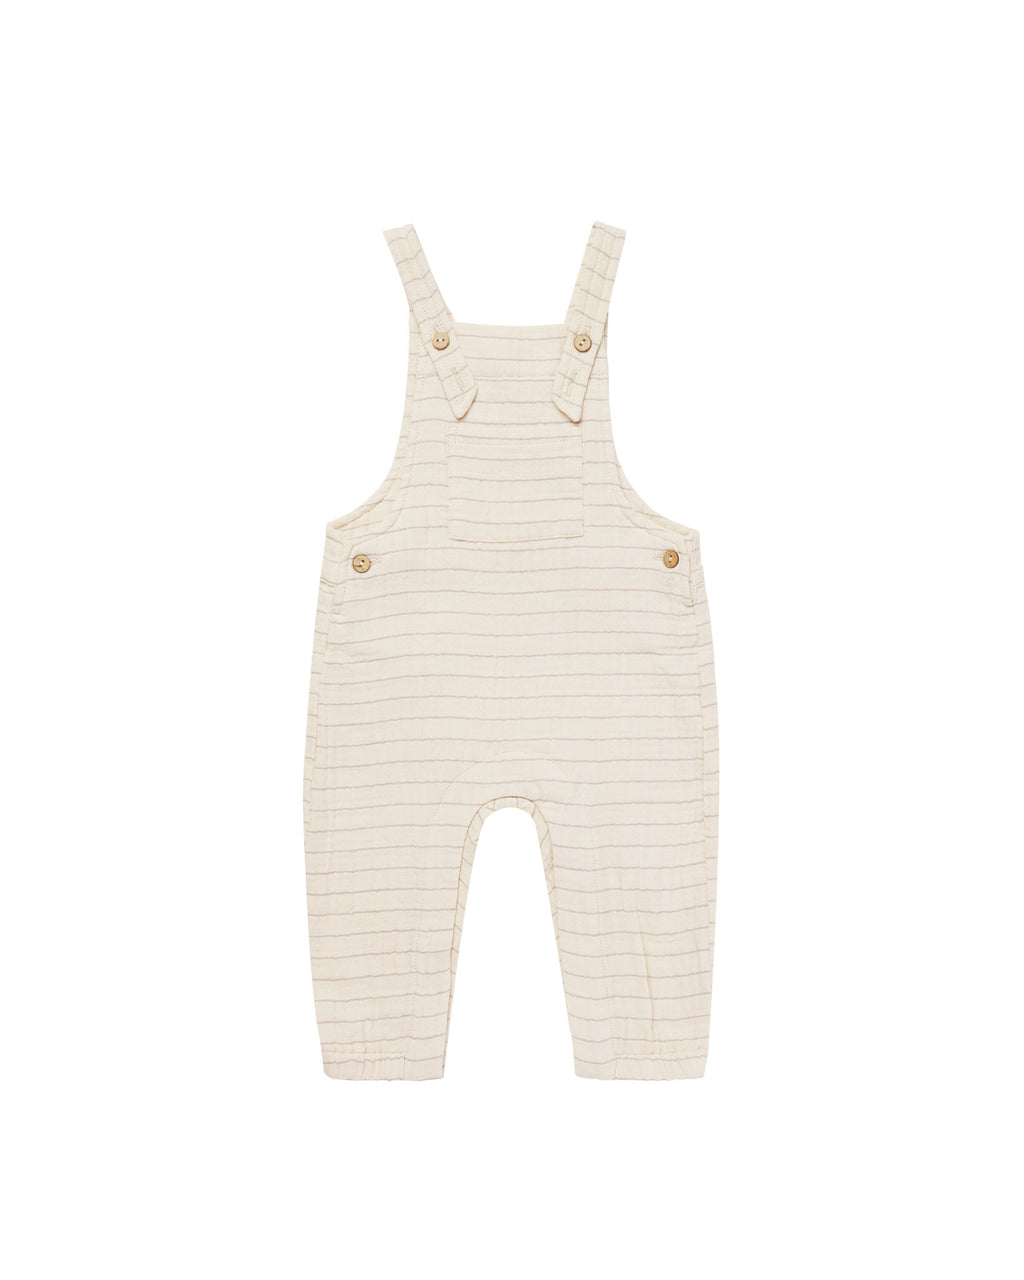 Quincy Mae Baby Overall - Vintage Stripe